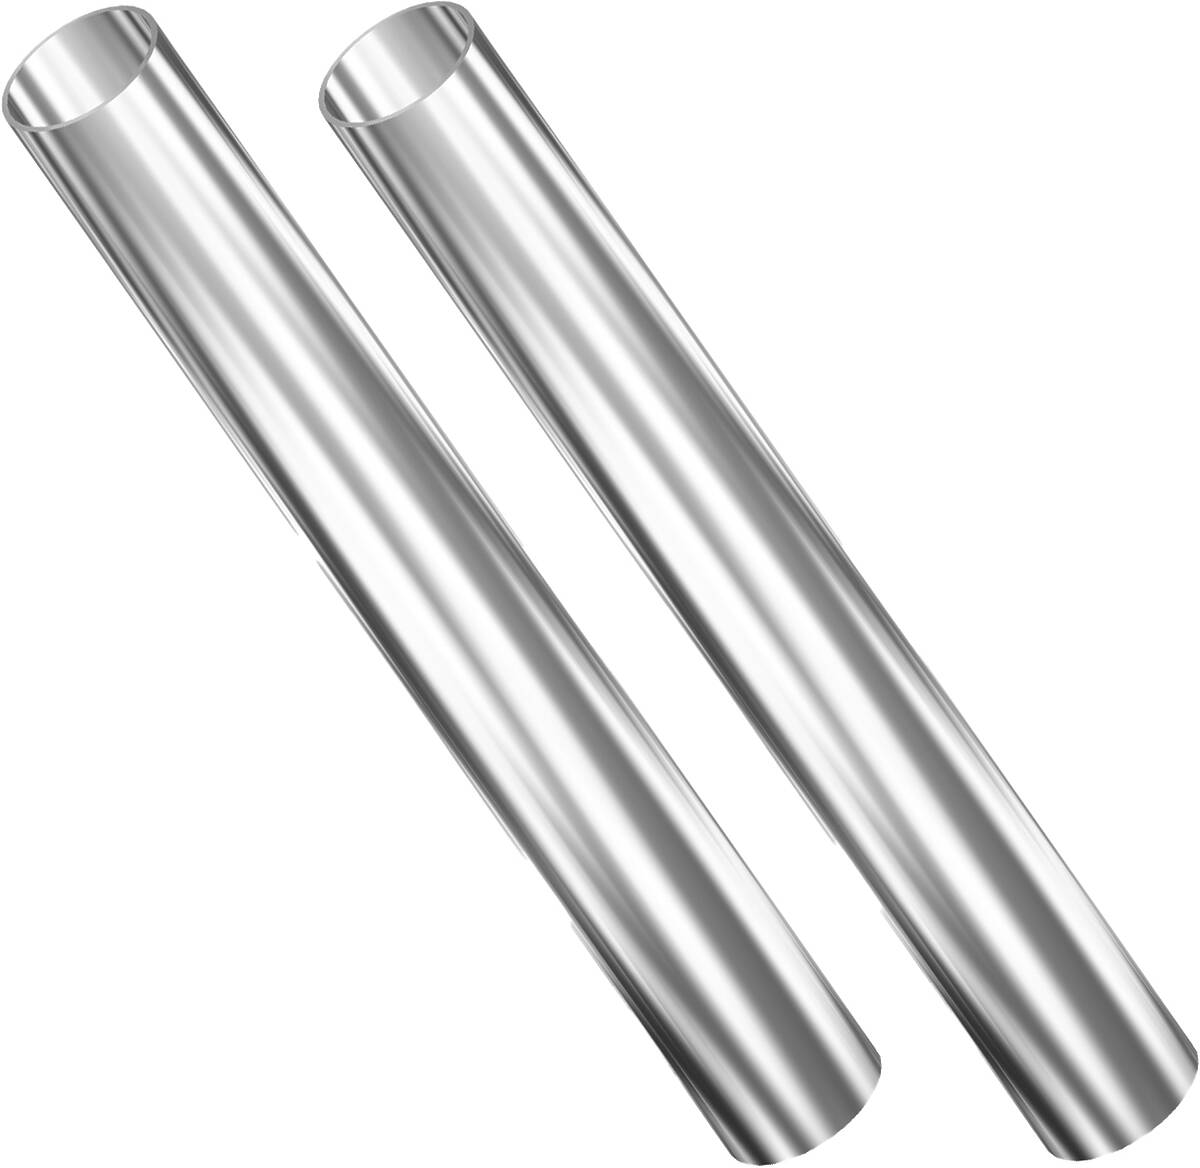 Unicol 2000X2 2 x 200cm mild steel chrome finished column product image. Click to enlarge.